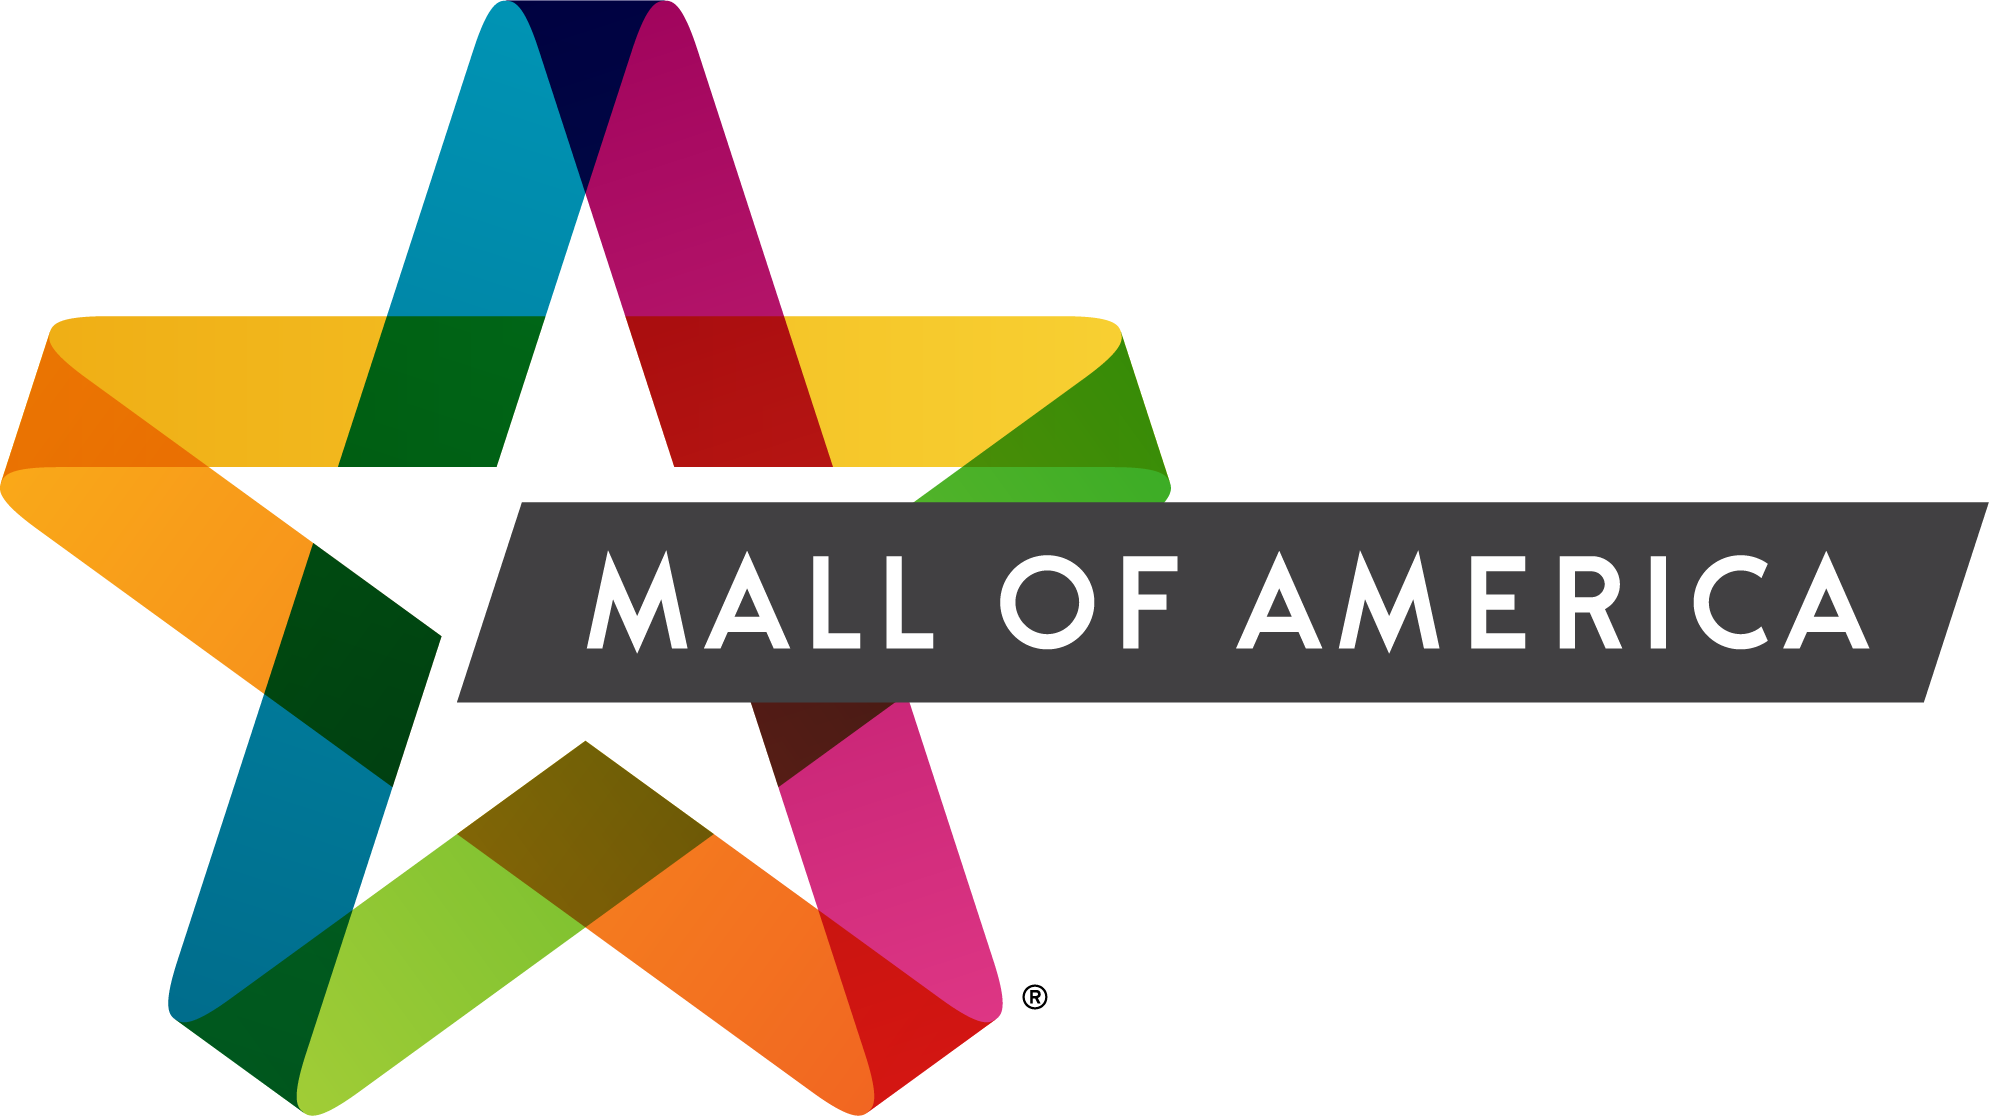 Mall of America Recognized With Social Responsibility Award For Its Commitment To Sustainability